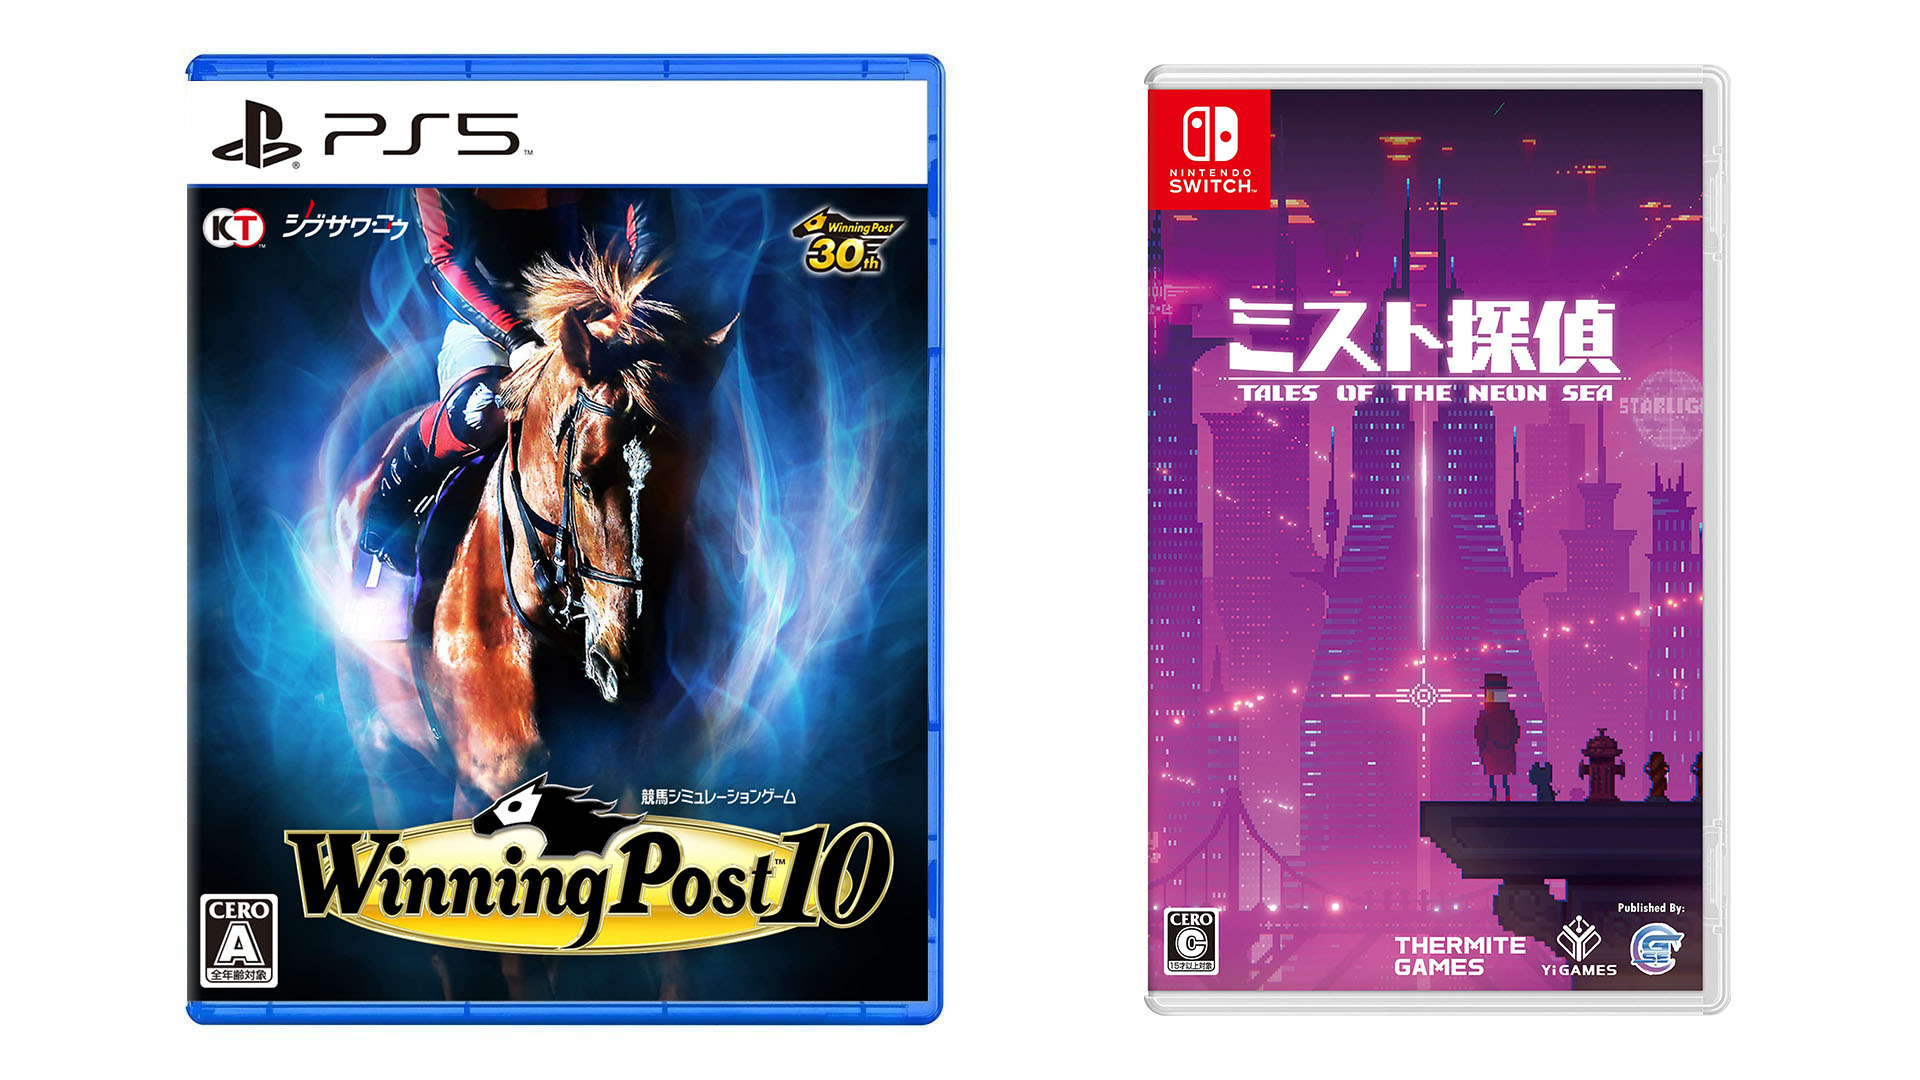 This Week’s Japanese Game Releases: Winning Post 10, Tales of the Neon Sea, more